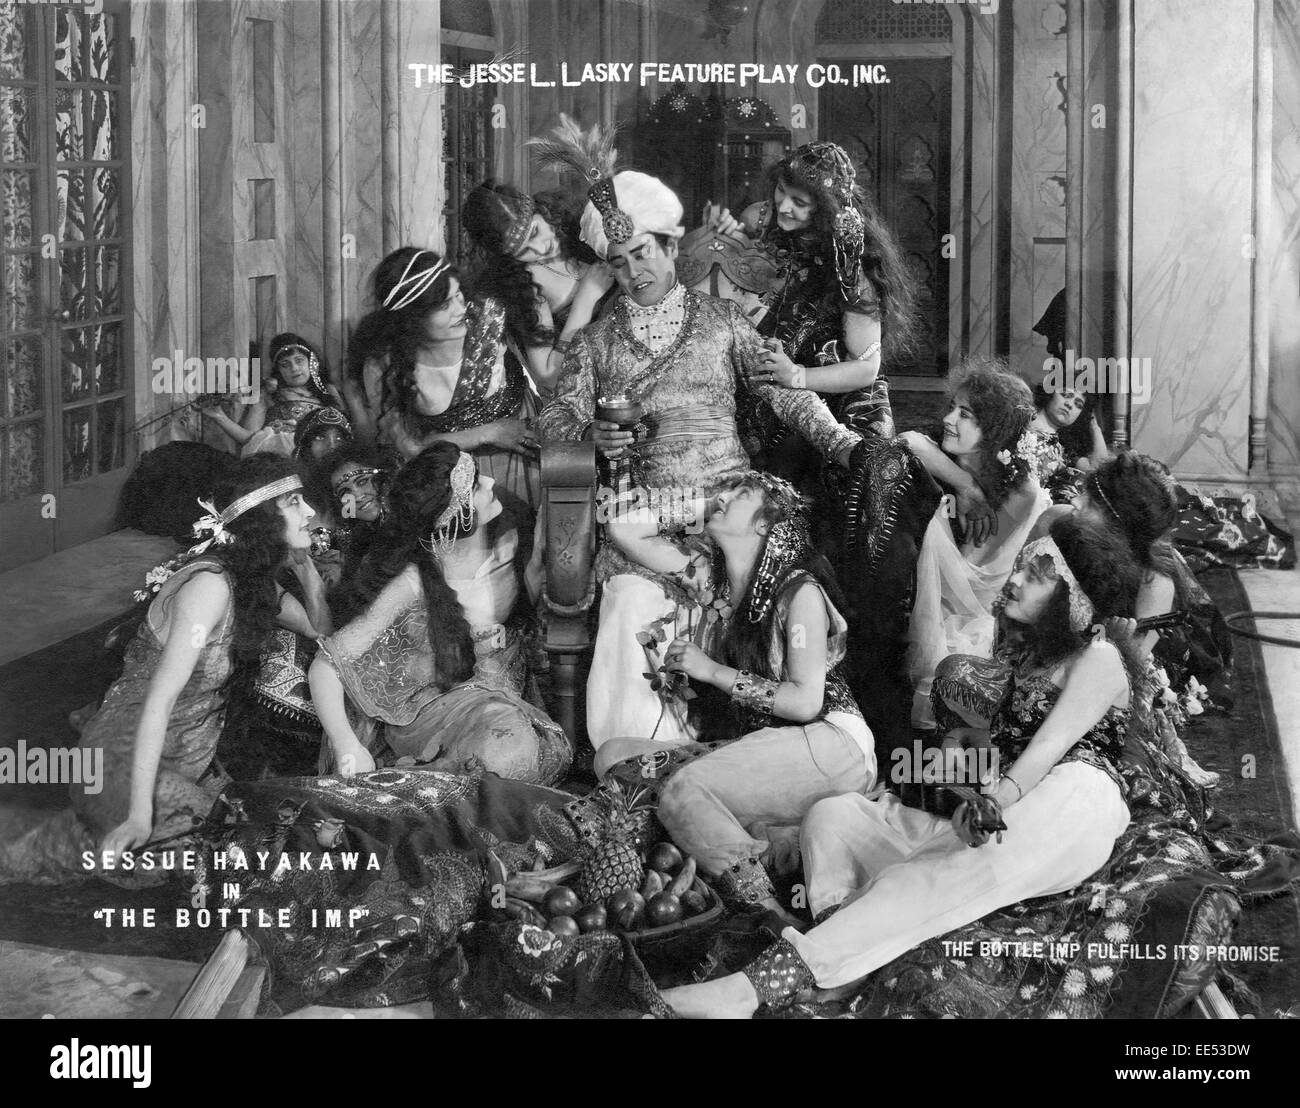 Sessue Hayakawa, surrounded by Group of Beautiful Women, on-set of the Silent Film, 'The Bottle Imp', 1917 Stock Photo